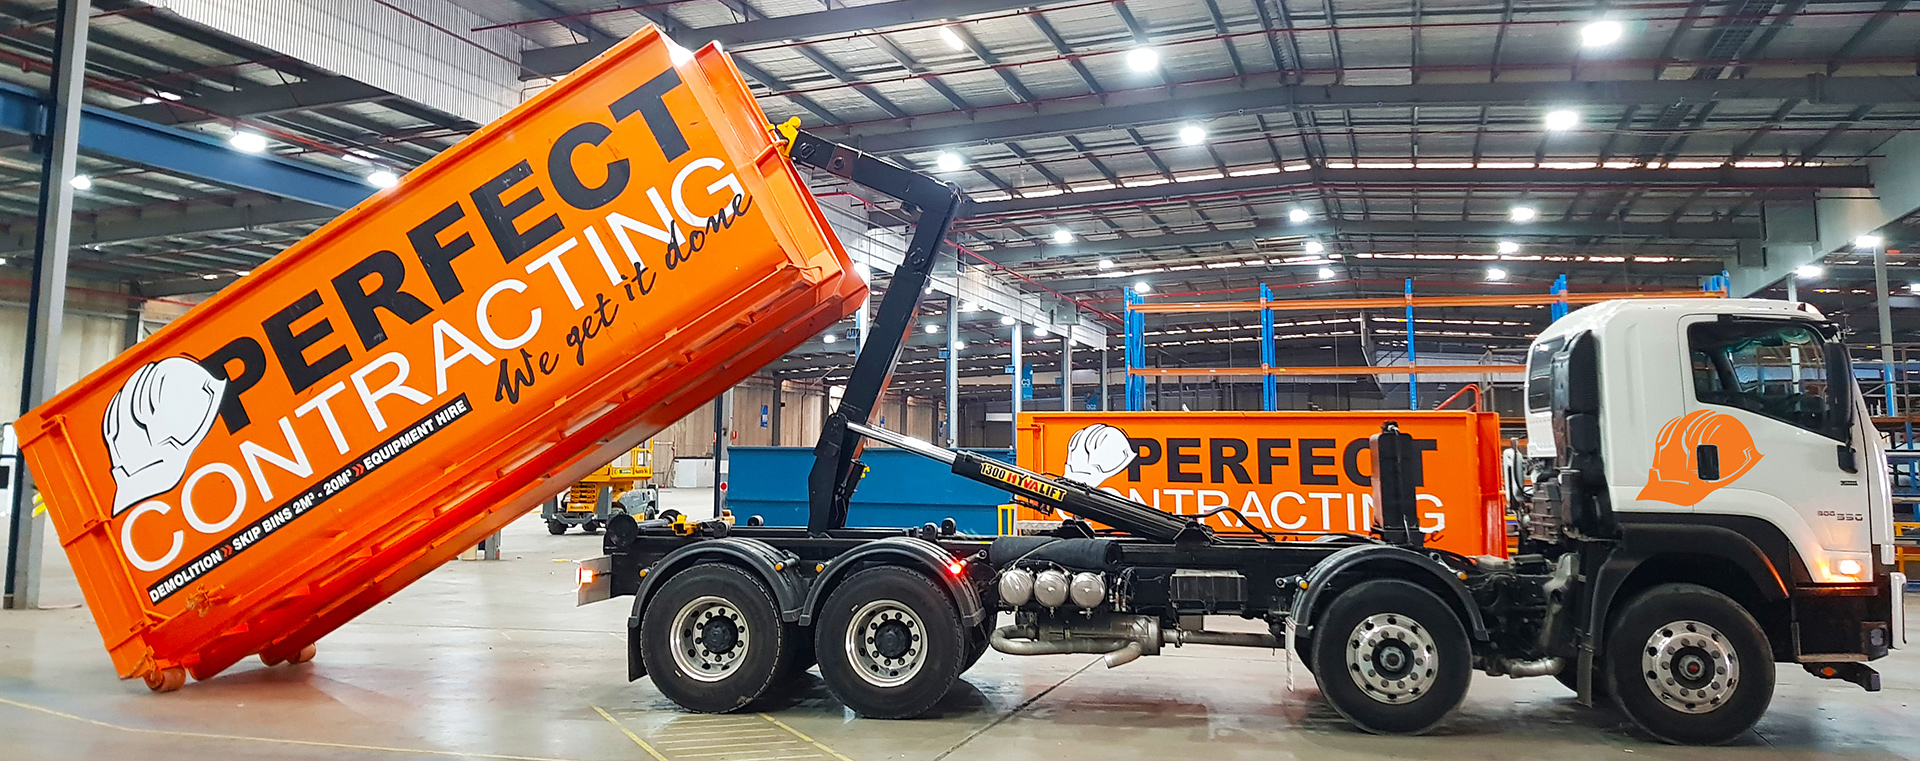 Waste & Rubbish Removal - Recycling - Perfect Contracting